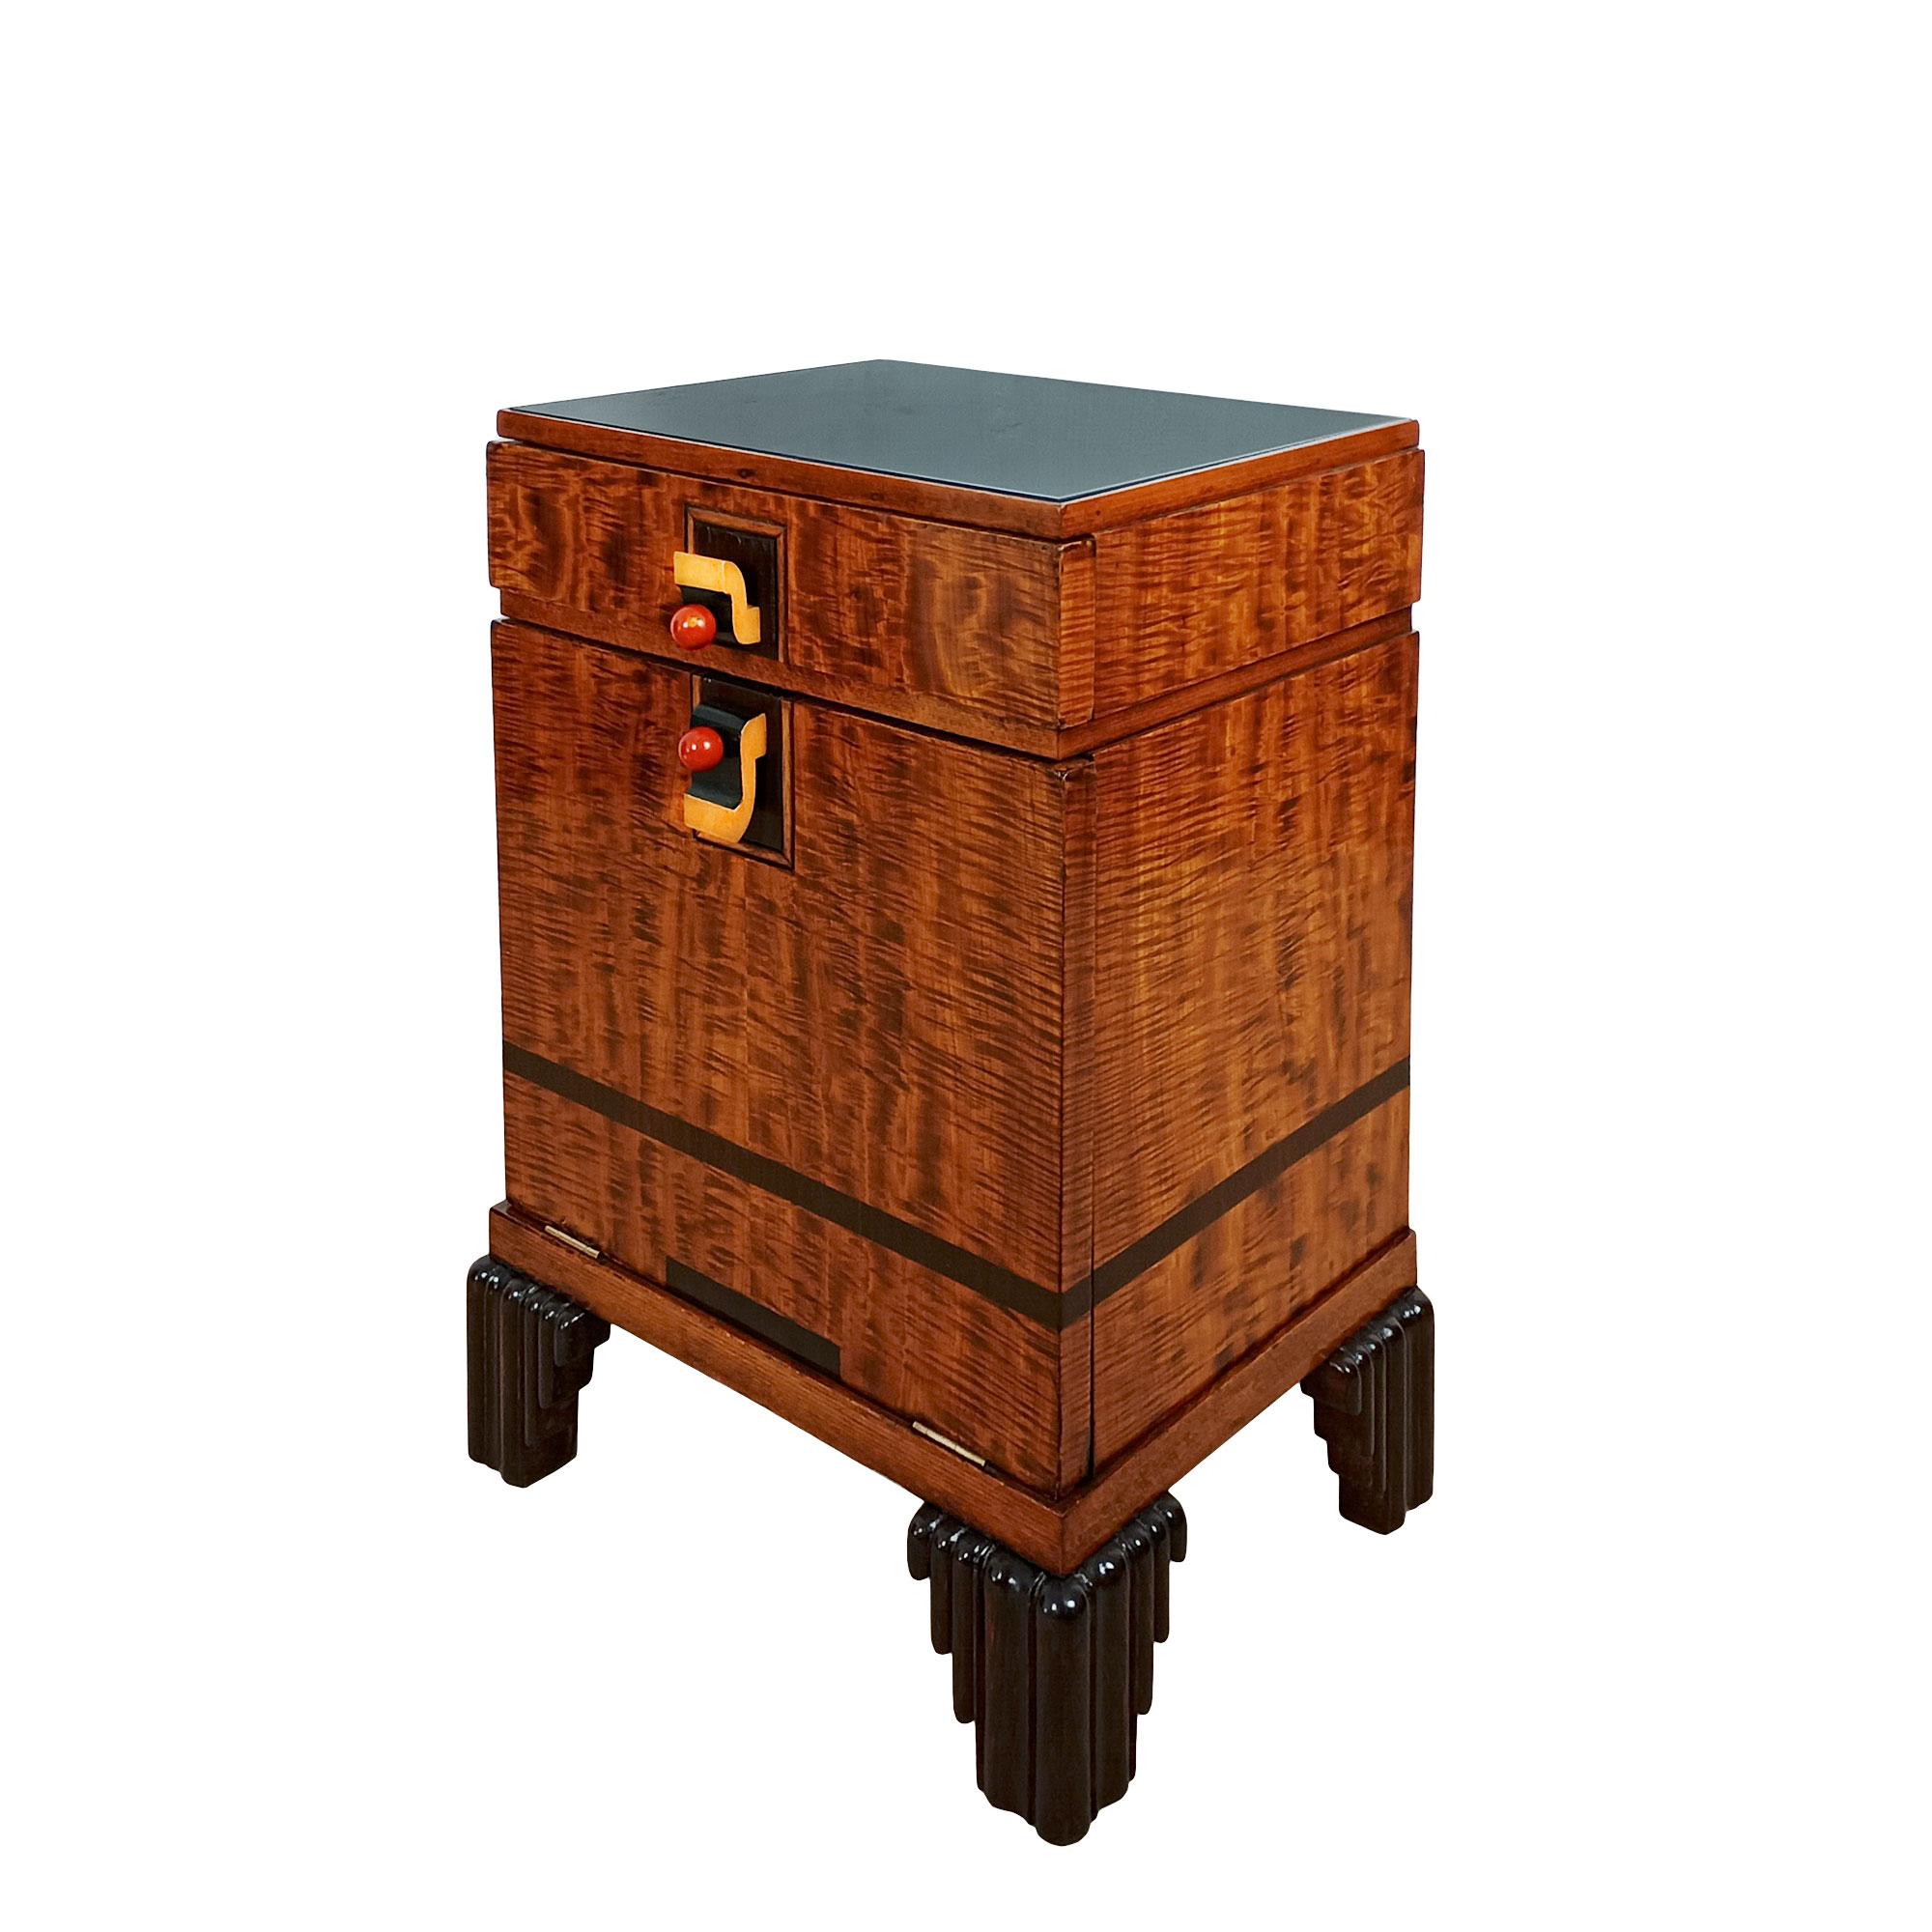 Art Deco cubist bedside table in lemon veneer with mahogany rods, stained beech legs, pearwood and black lacquer handles on the drawer and flap door, coral-red bakelite knobs. Black opaline top. French polish.
Spain, Barcelona circa